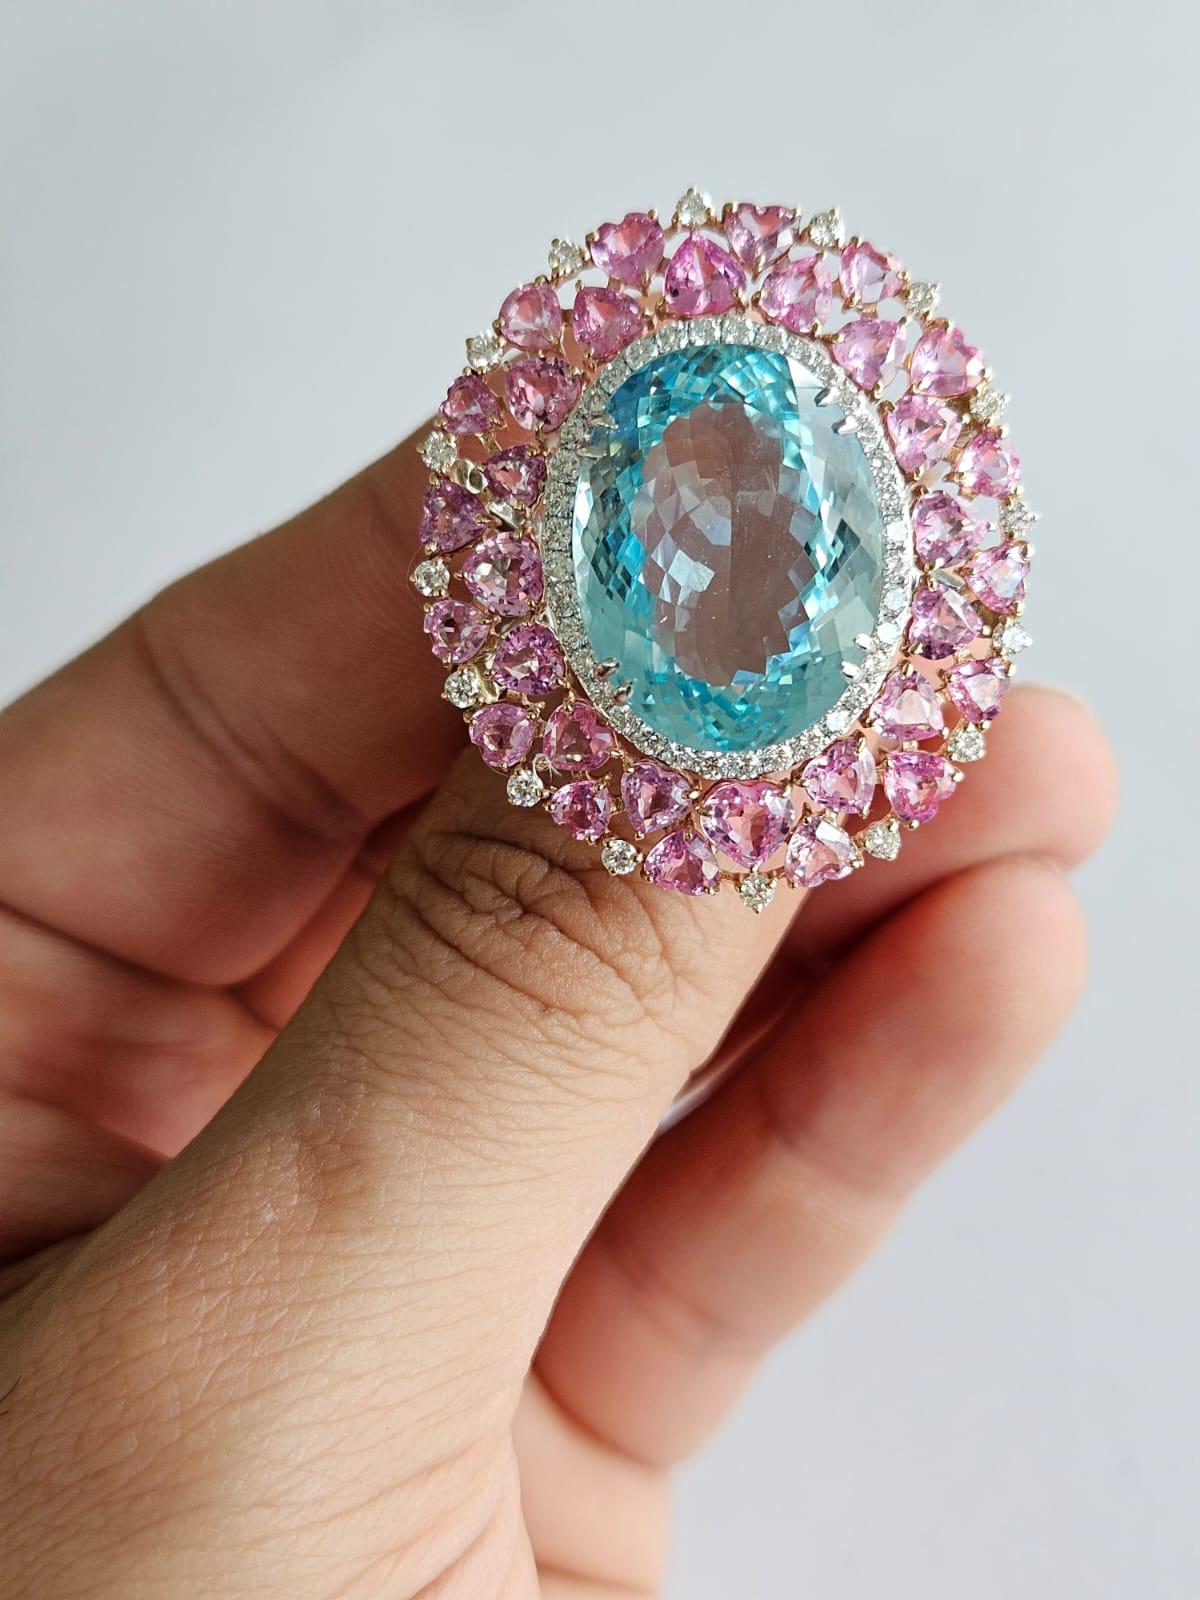 A very gorgeous and beautiful, Aquamarine & Pink Sapphires Cocktail Ring set in 18K White Gold & Diamonds. The weight of the Aquamarine is 19.58 carats. The Pink Sapphires weight is 7.24 carats. The heart shaped Pink Sapphires are of Ceylon (Sri